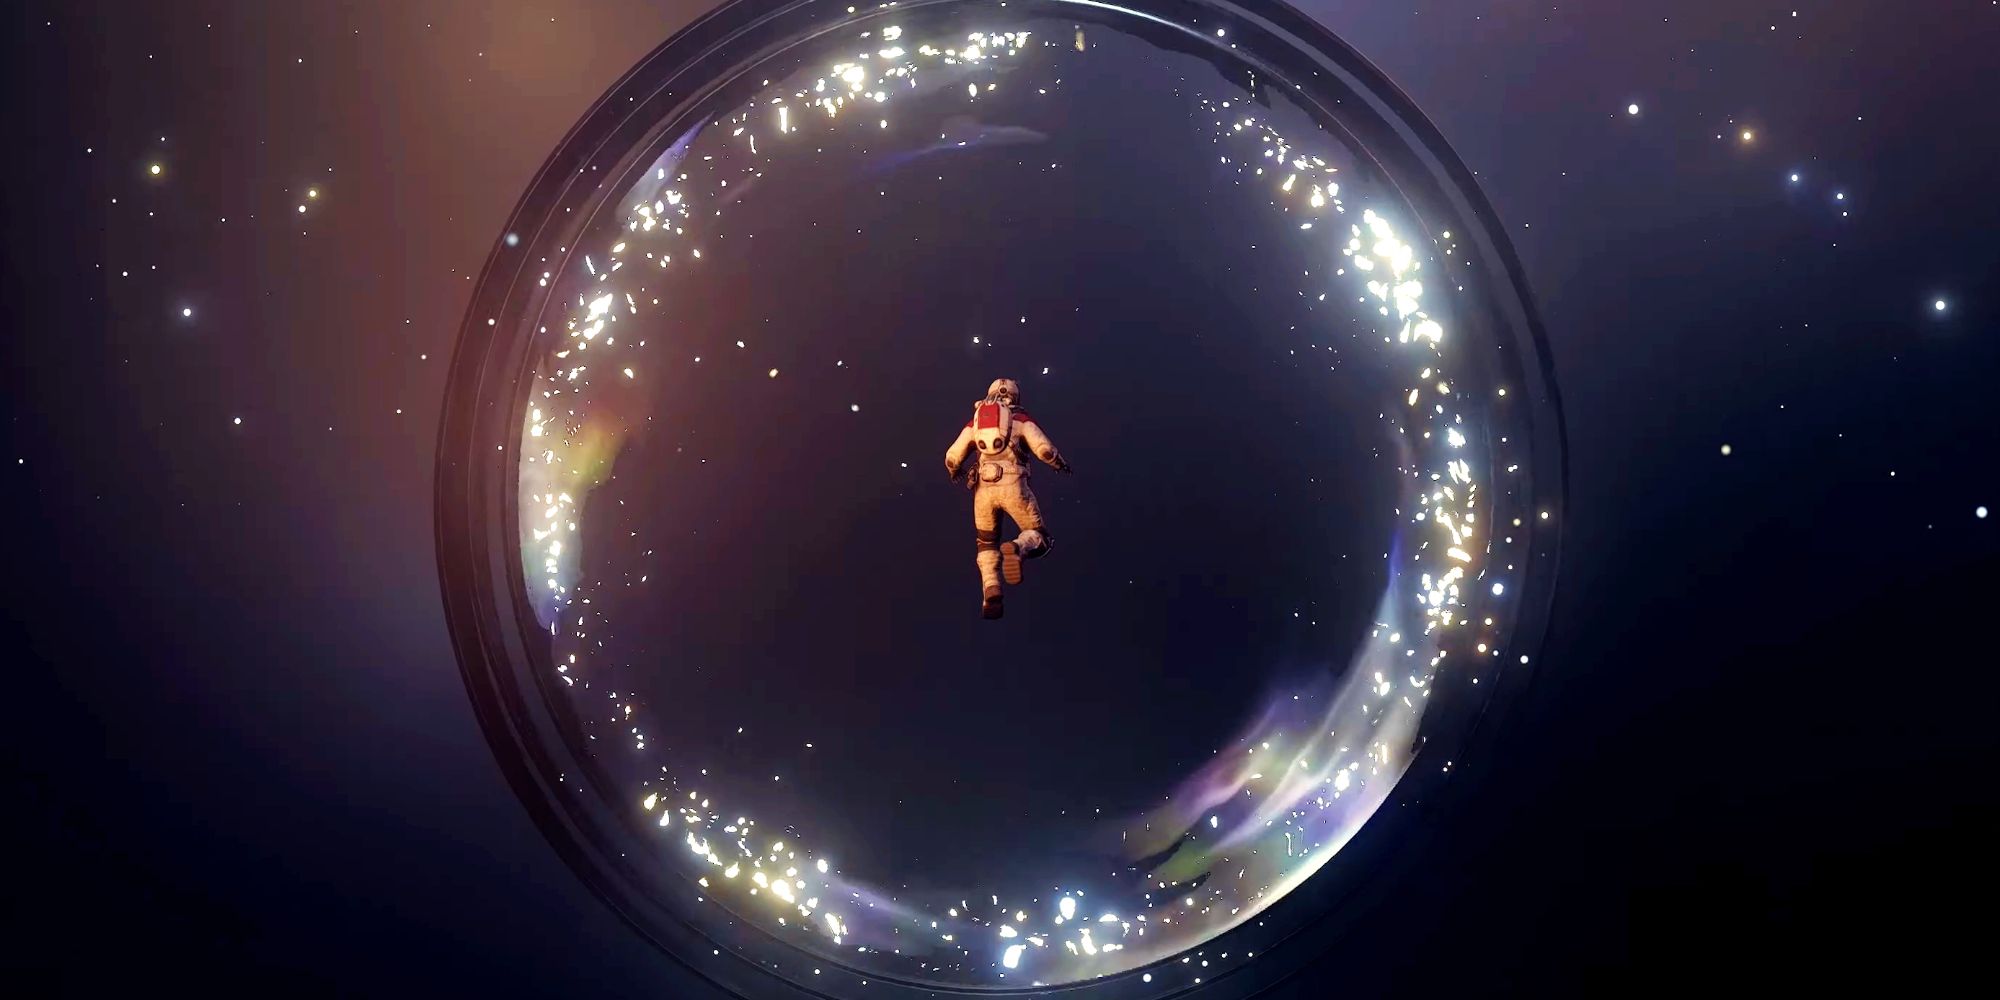 An astronaut in Starfield floating in front of some mysterious ring that appears to be surrounded by stars.